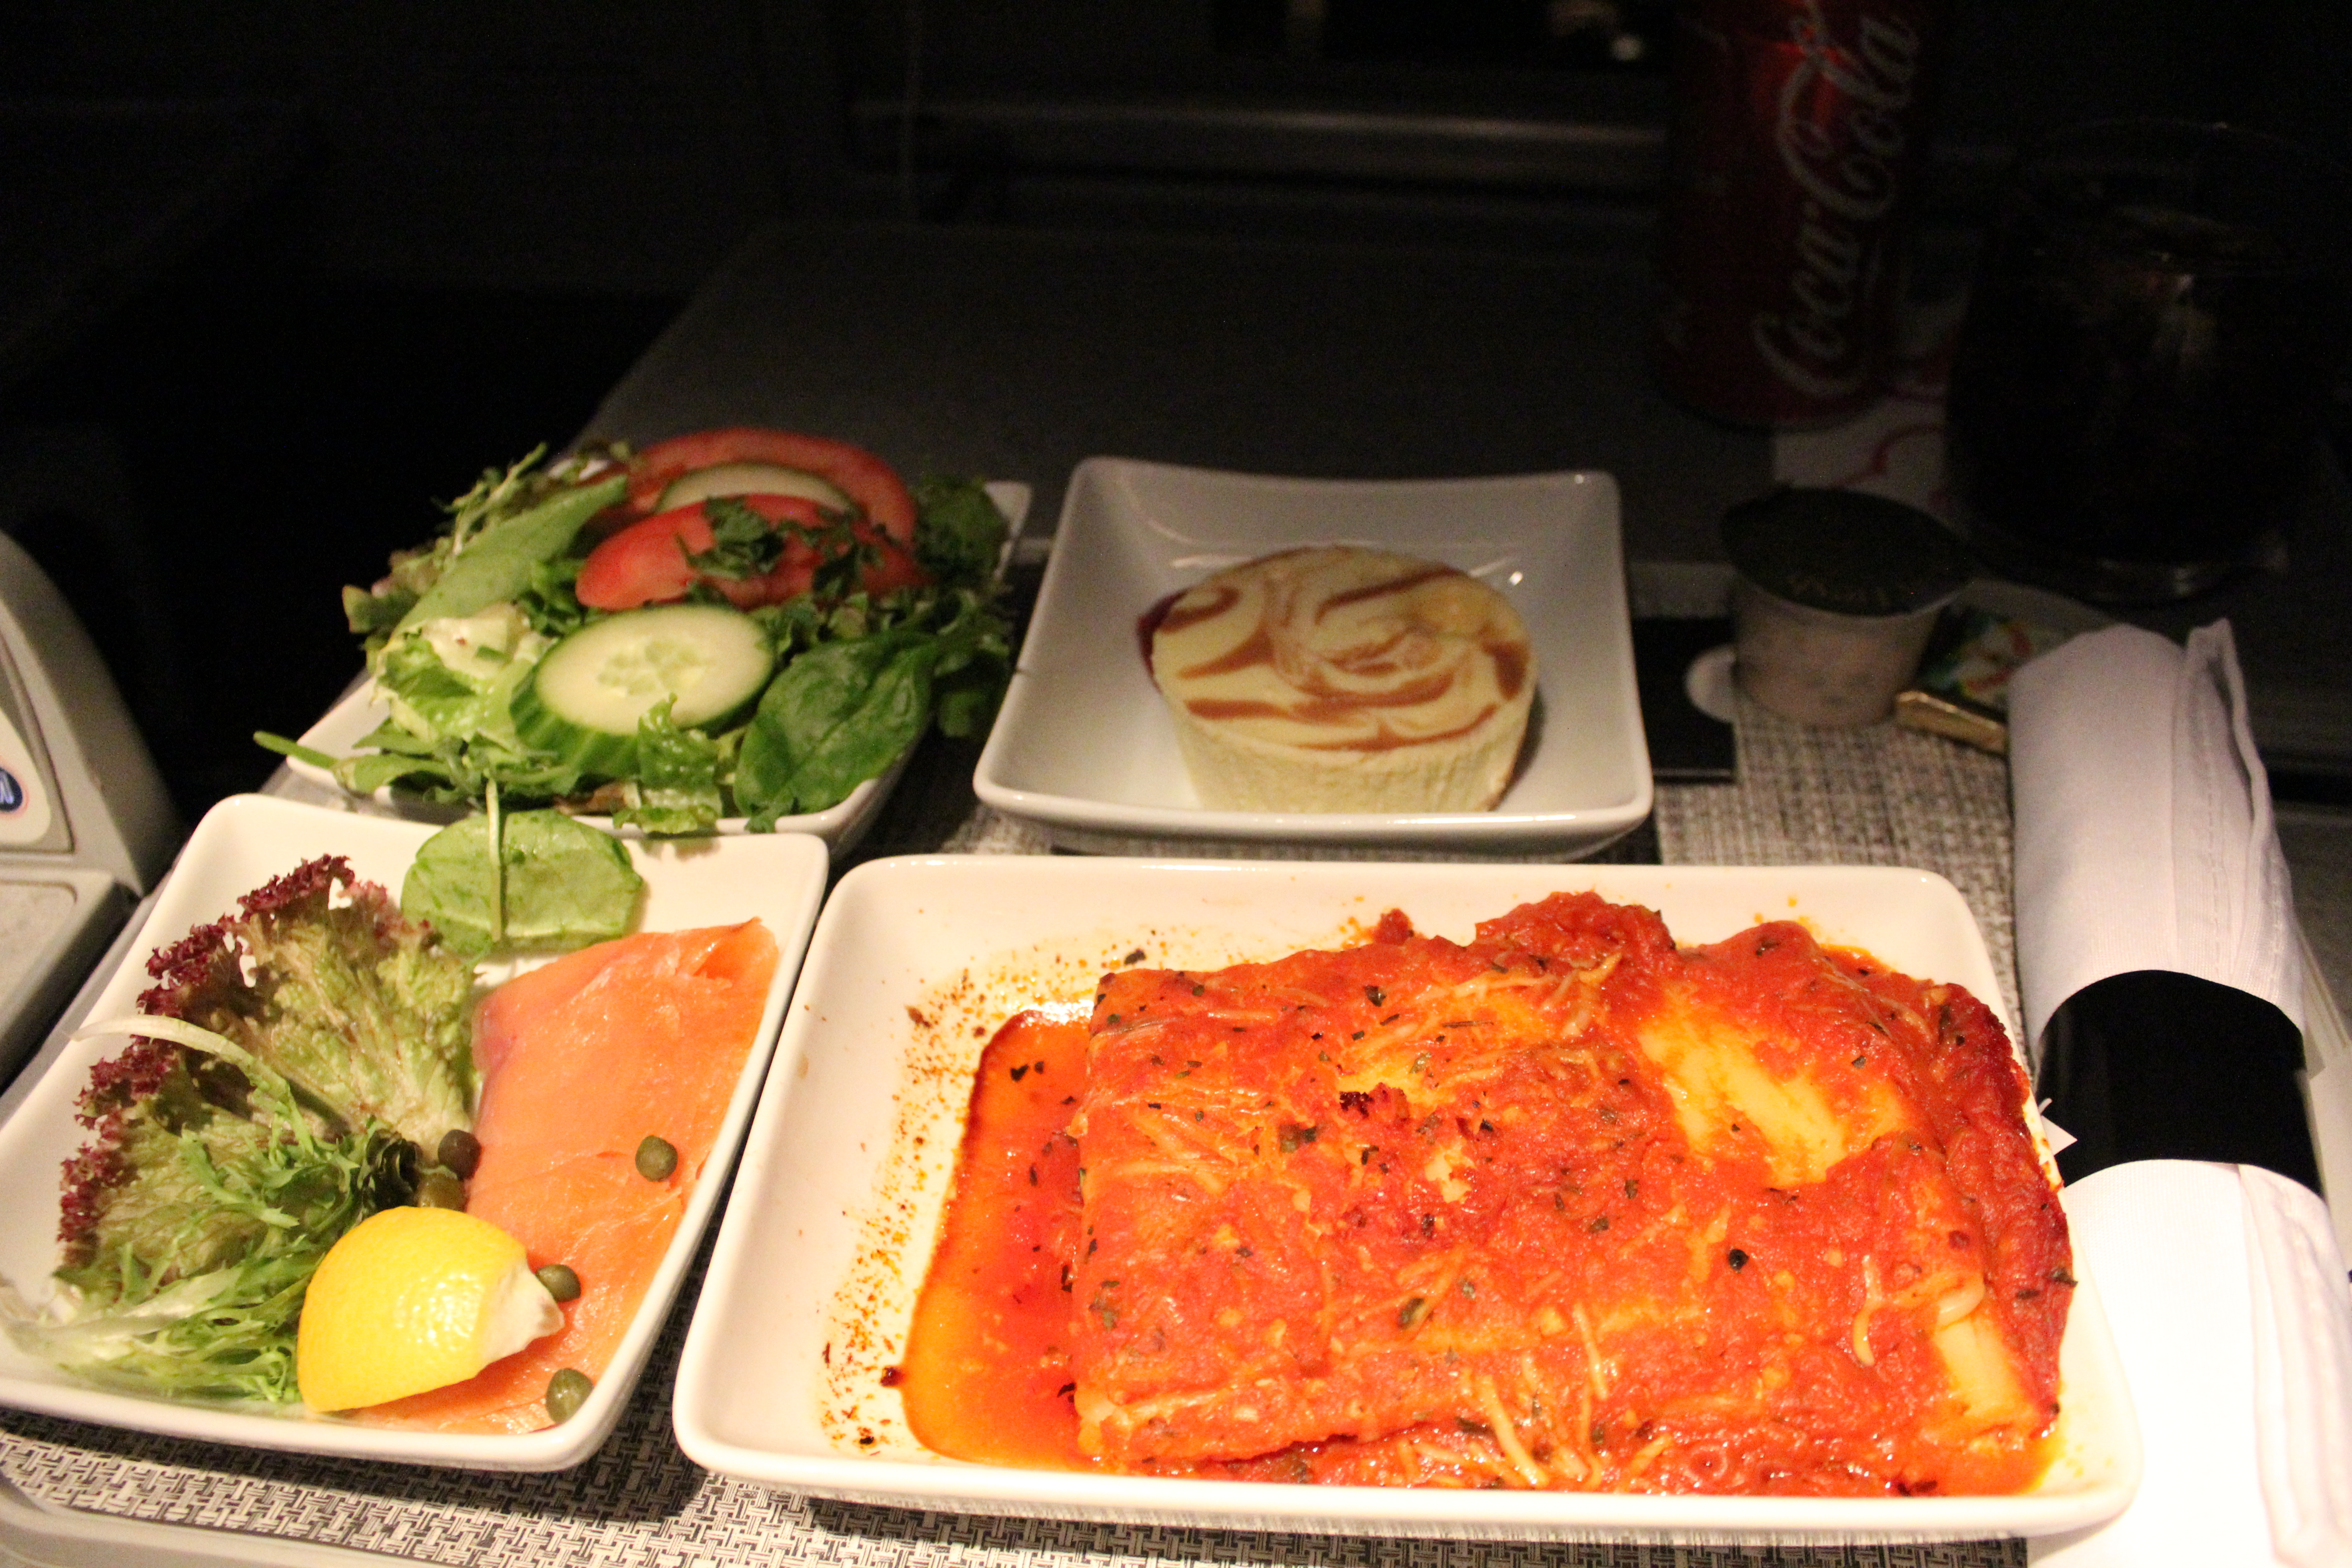 AA 757 Business Class Meal Service